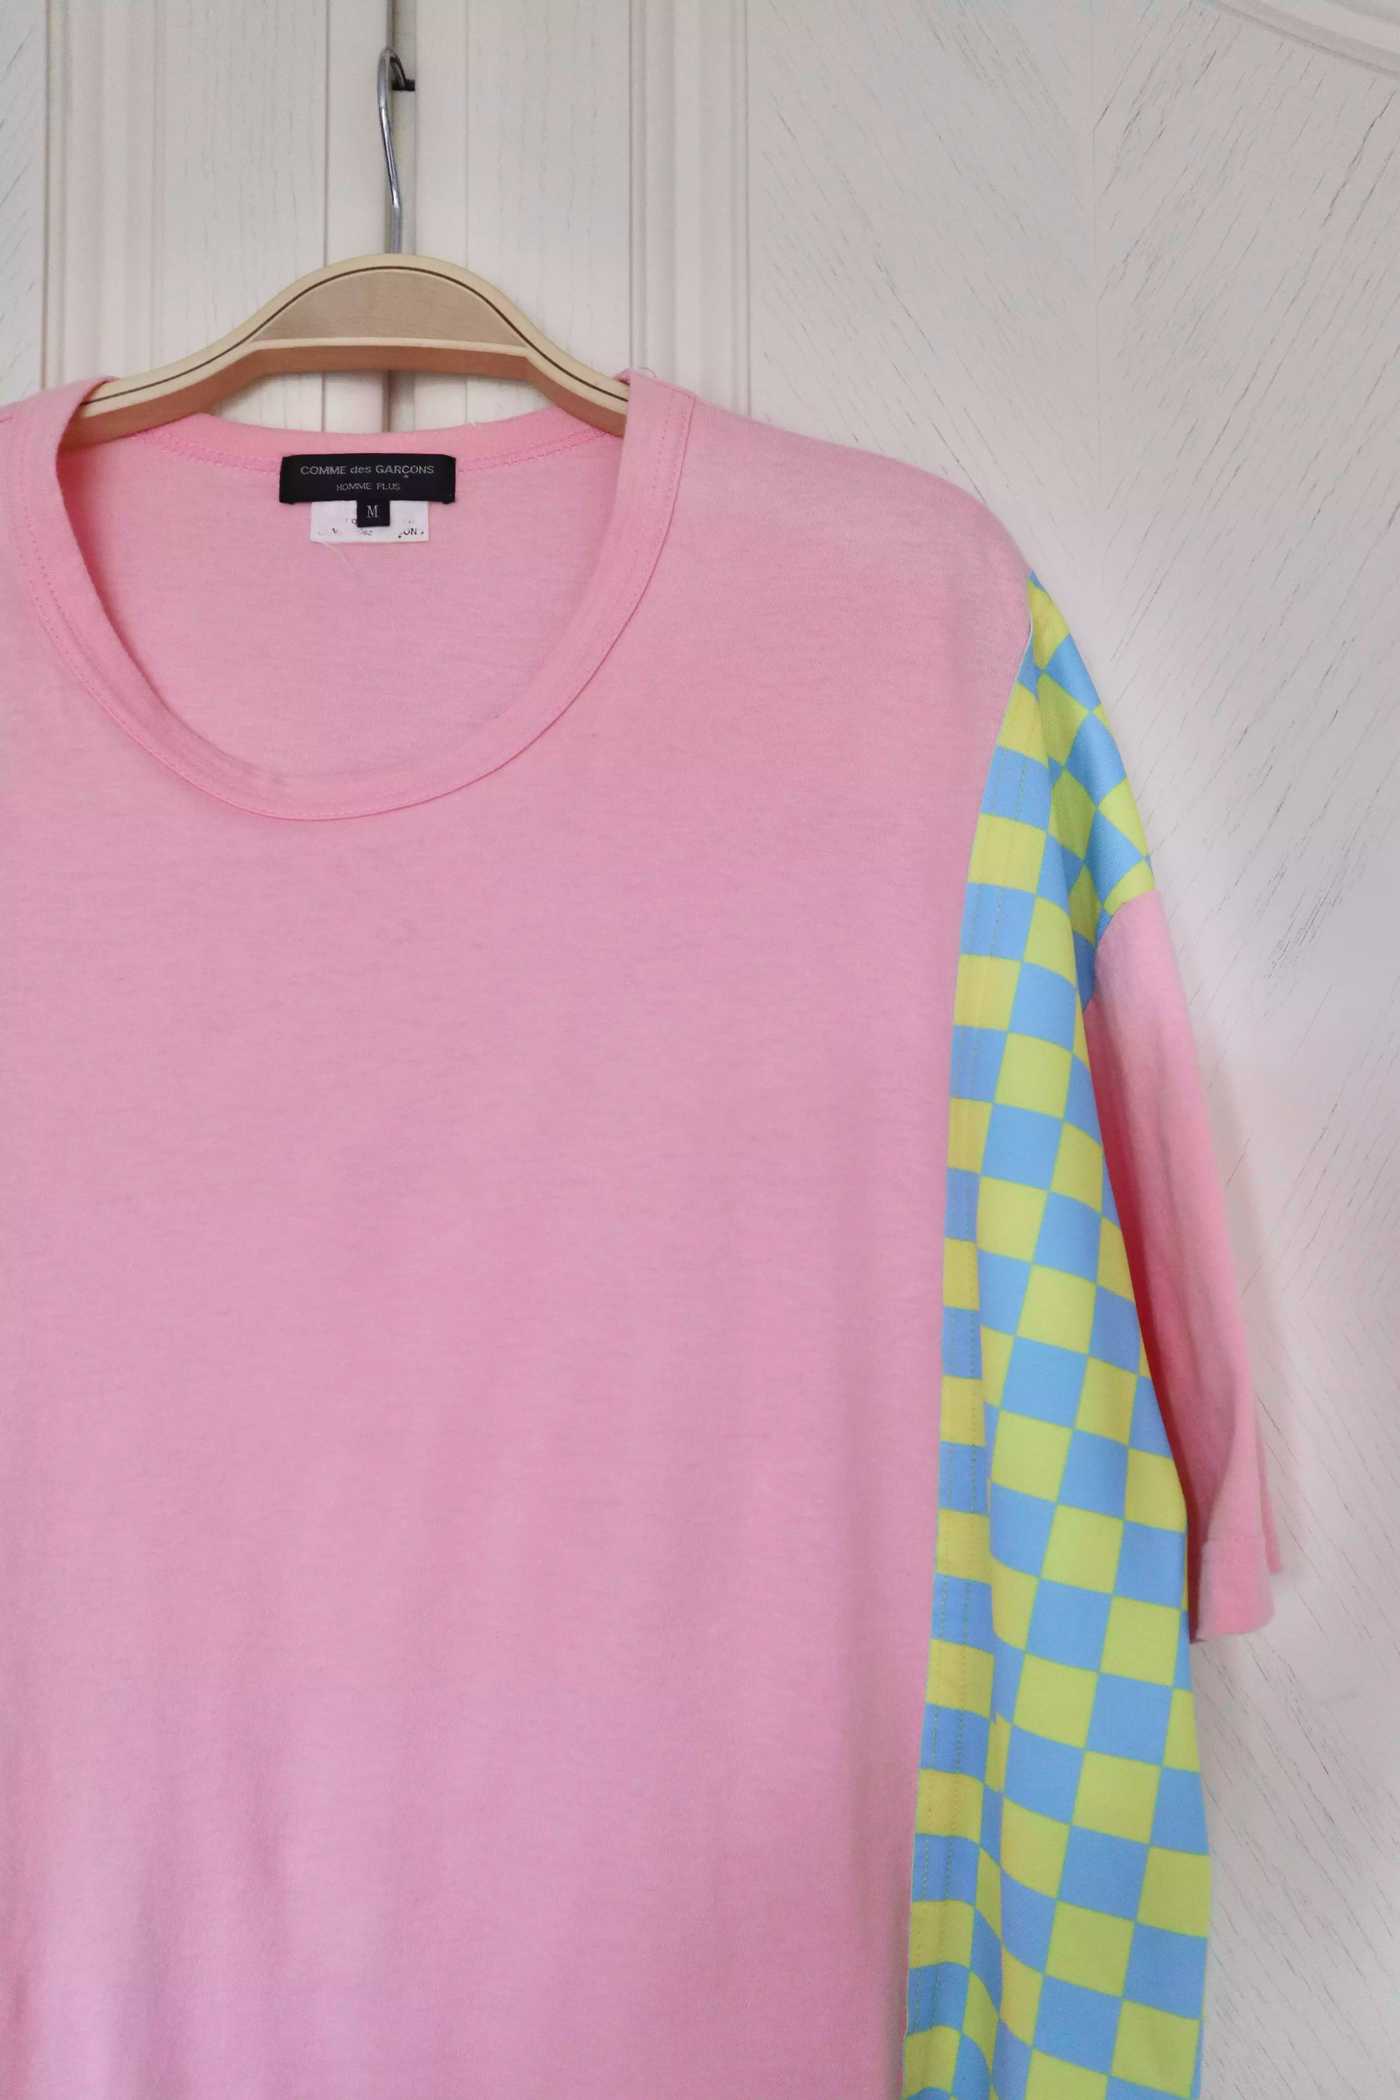 CDG Homme Plus 18SS "Disco" Checked Patchwork Tee